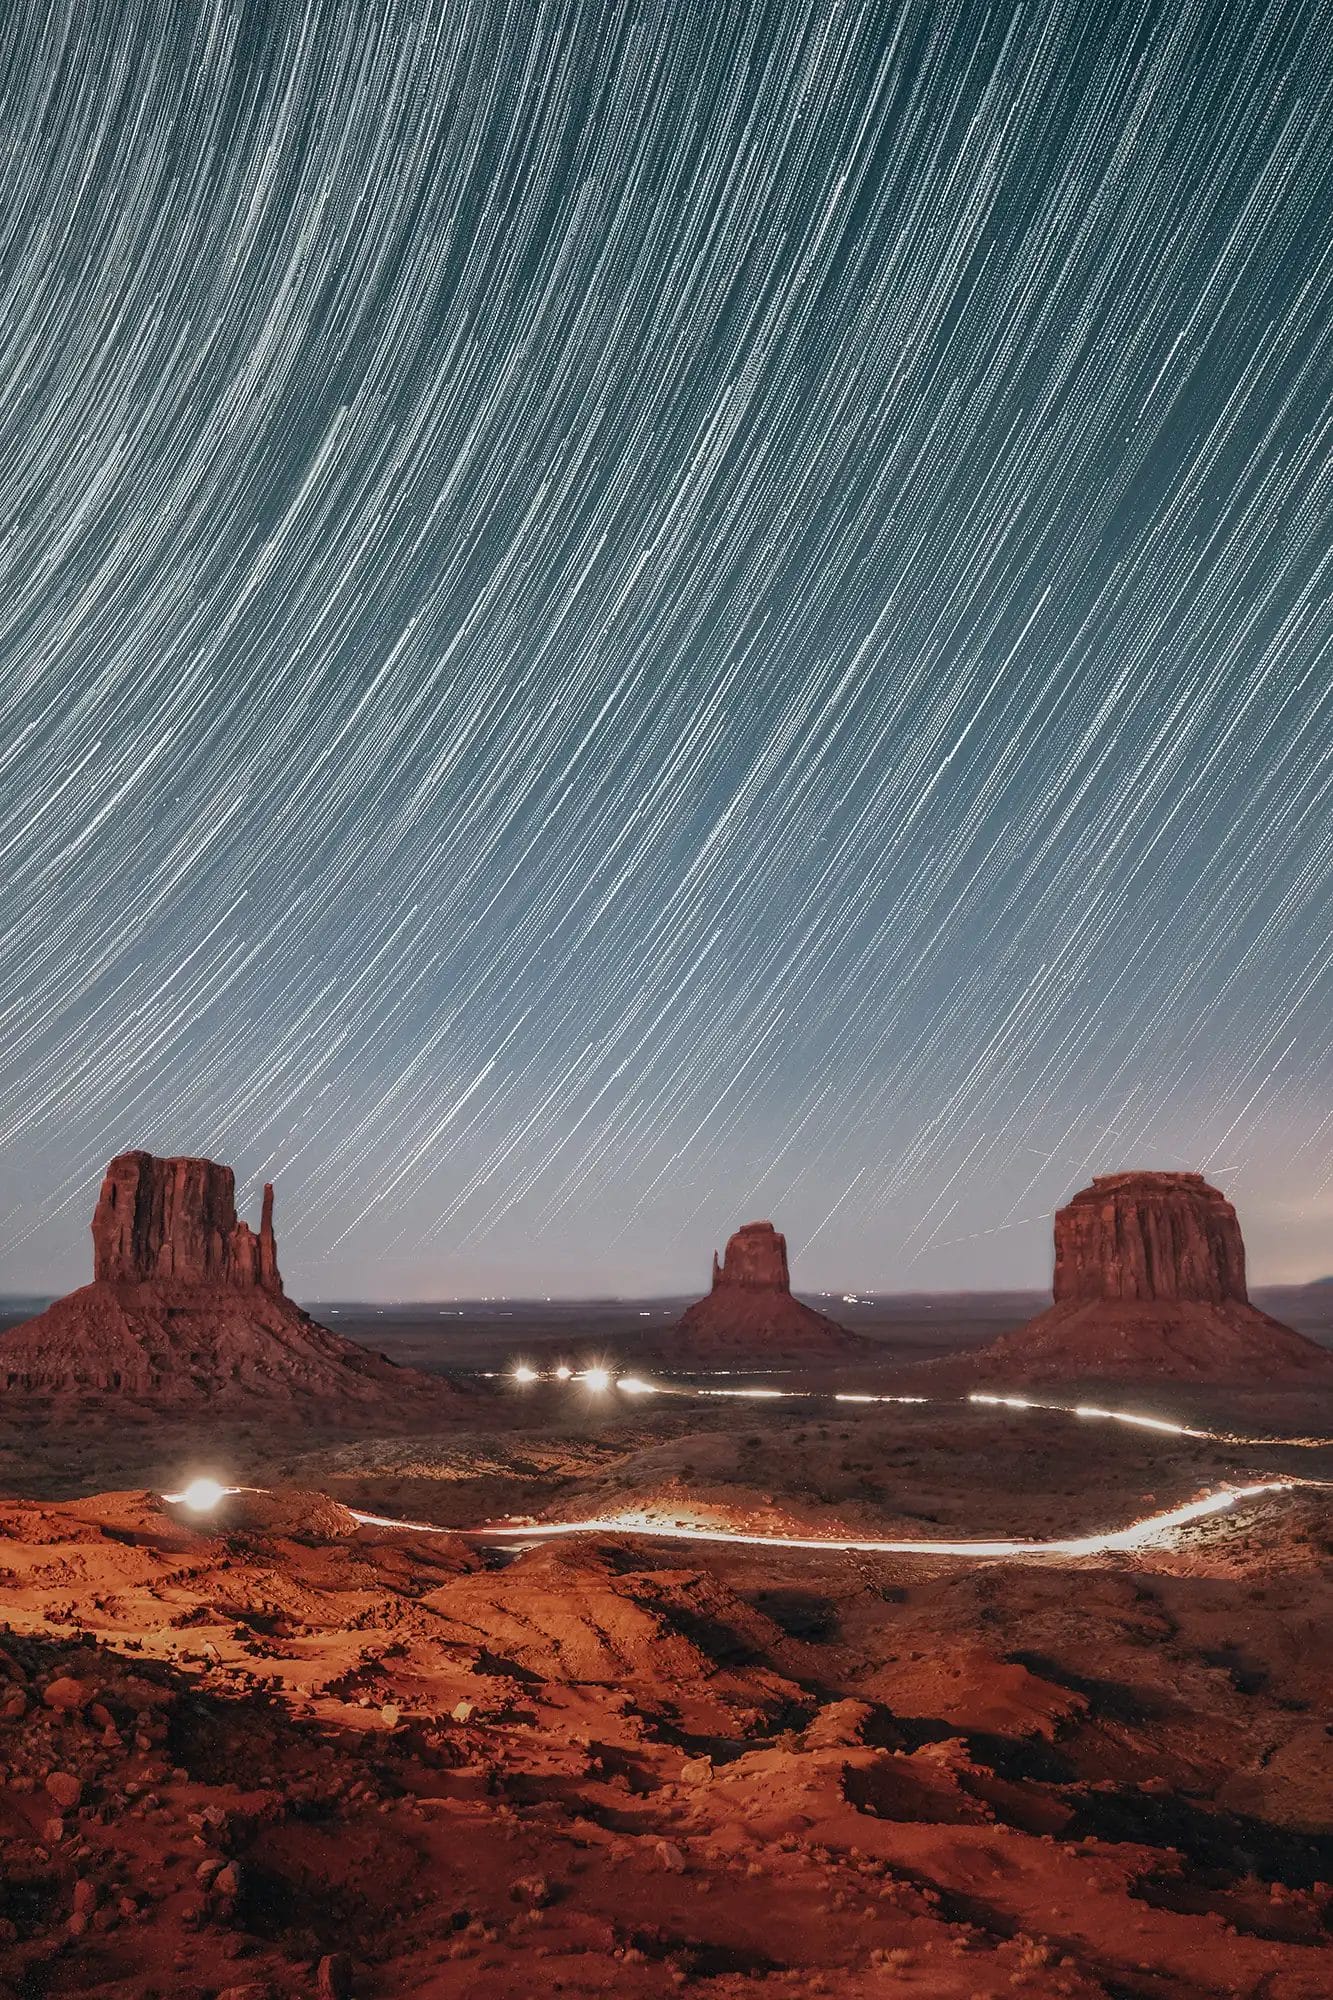 Star trails over Monument Valley in the USA. Copyright Emily Lowrey (iPhotography Instructor)